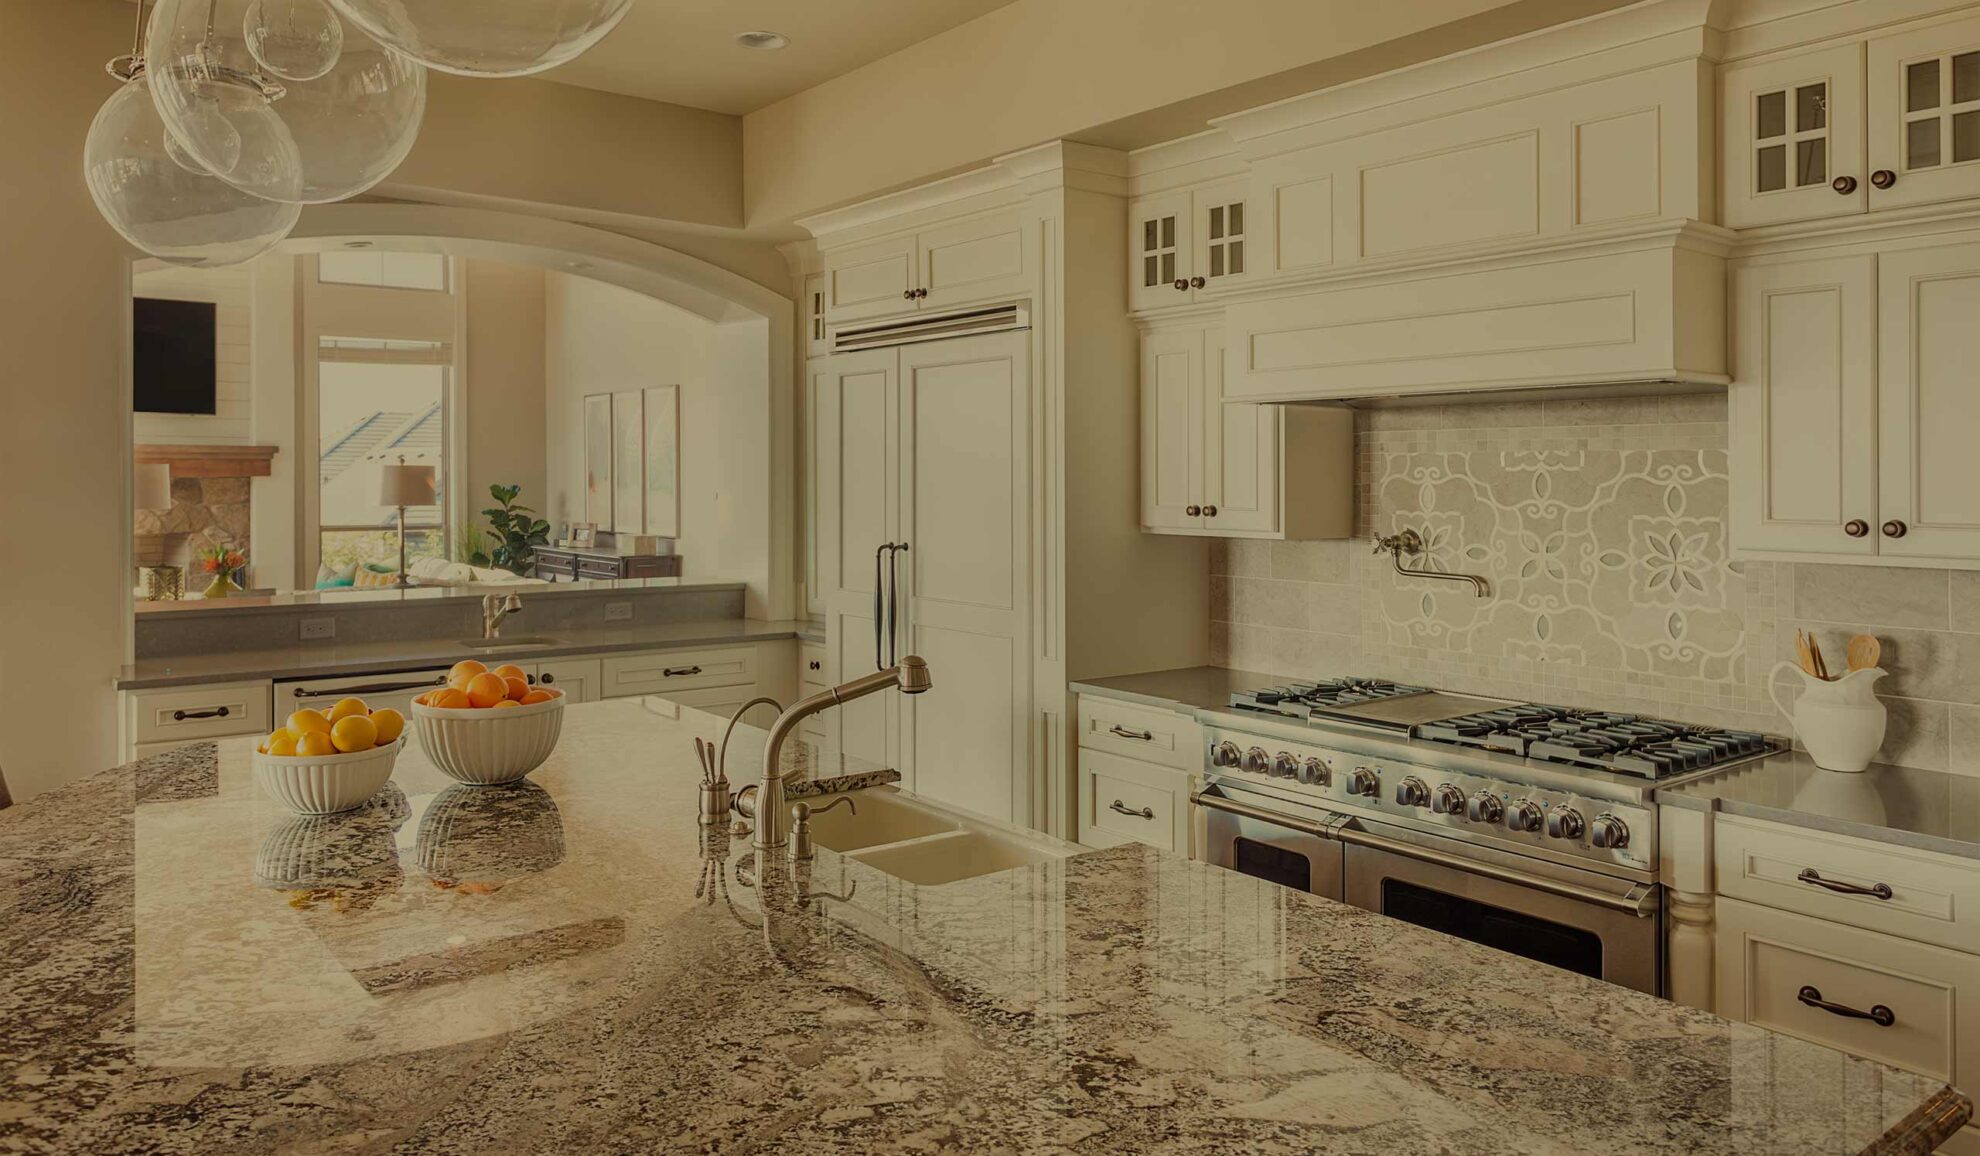 kitchen interiors remodeled with white cabinets and countertops rockaway nj